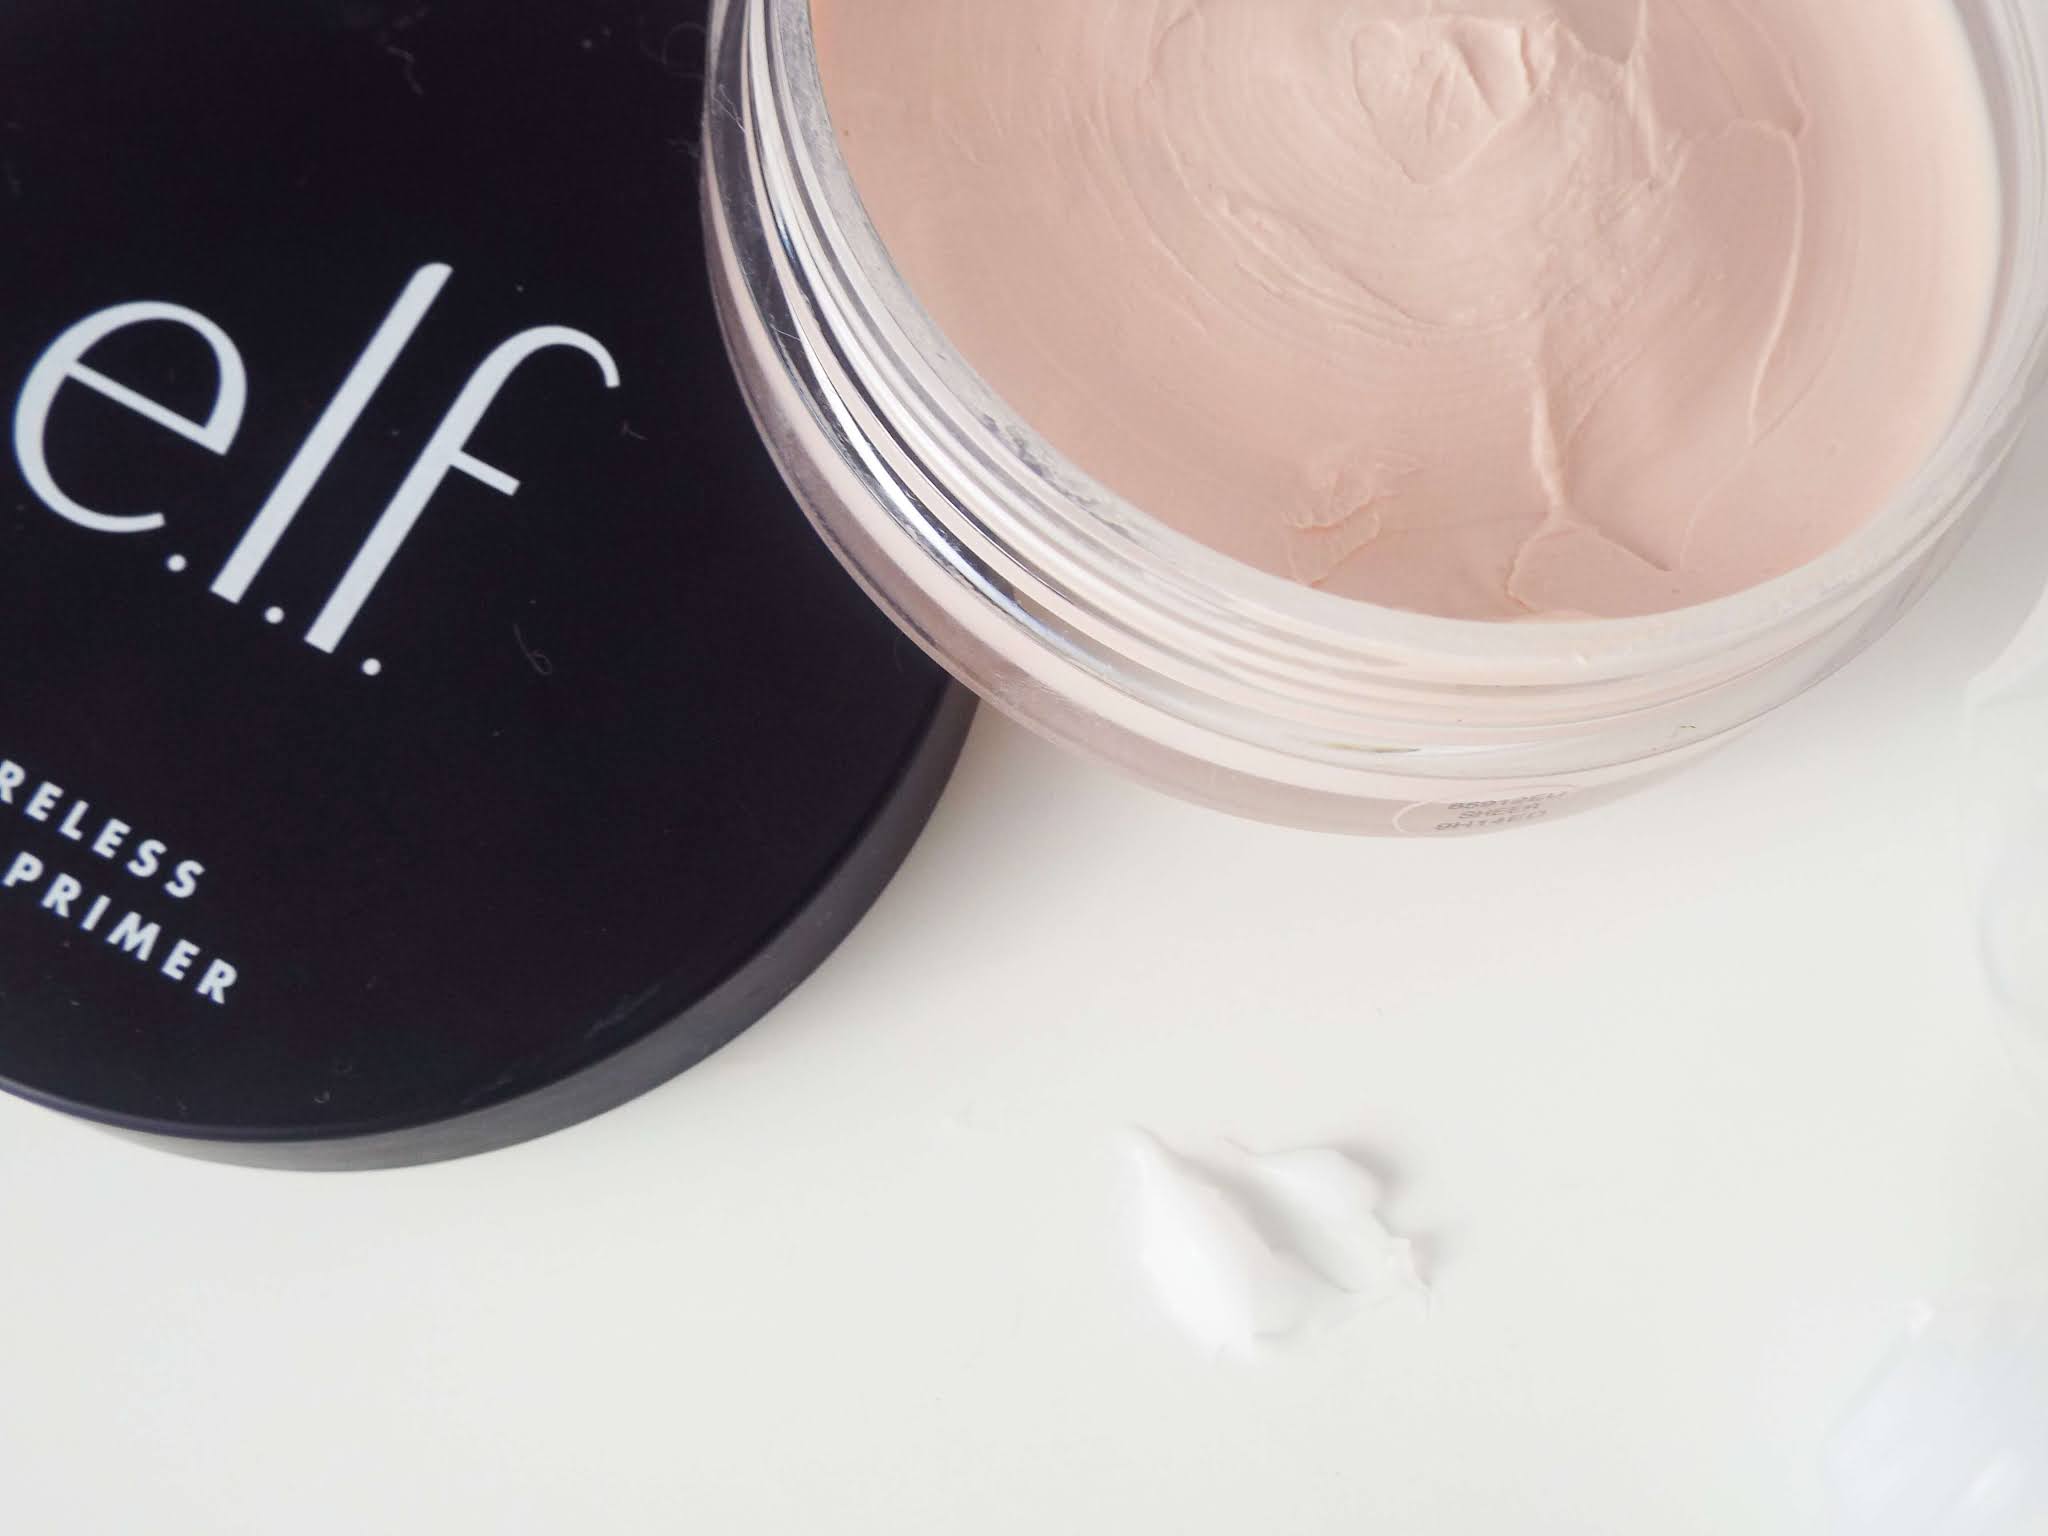 Ariel shot of the open Elf Poreless Putty Primer, with lid resting on side of pot and blob of The Ordinary High-Adherence Primer adjacent, comparing the difference in the thin, light pink Elf Poreless Putty Primer and thicker, white silicone The Ordinary Primer.